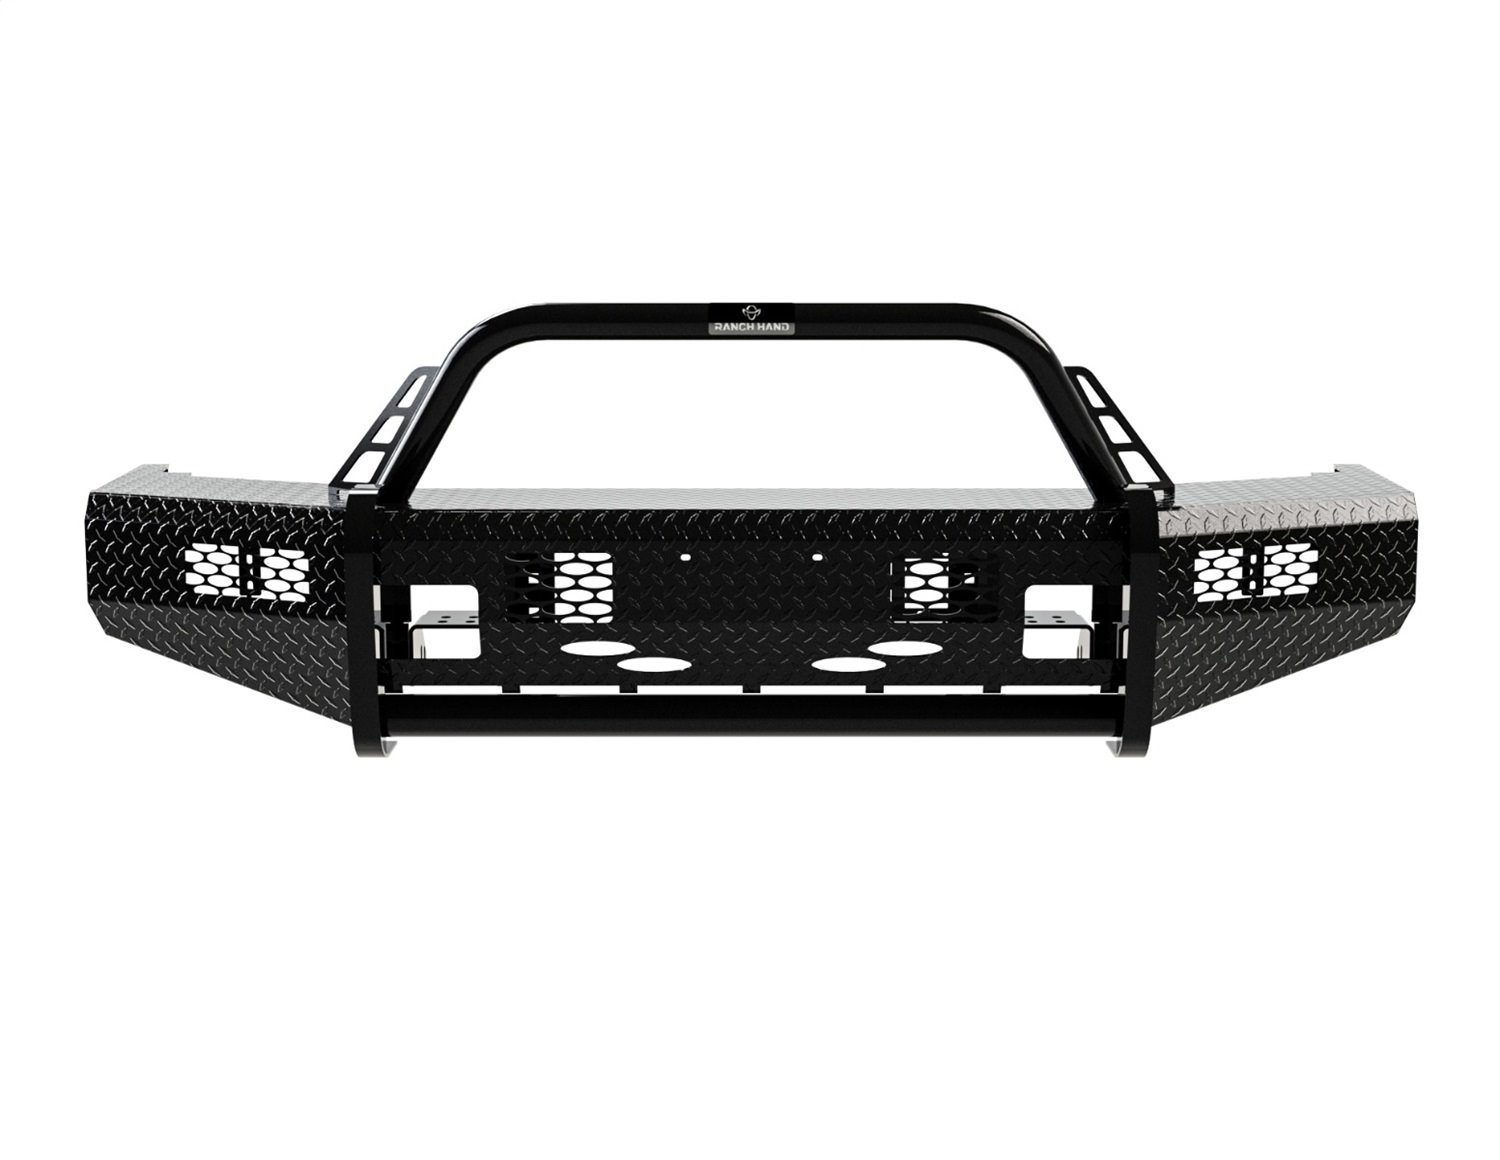 Summit BullNose Series Front Bumper Fits Select Ford F-250/F-350/F-450